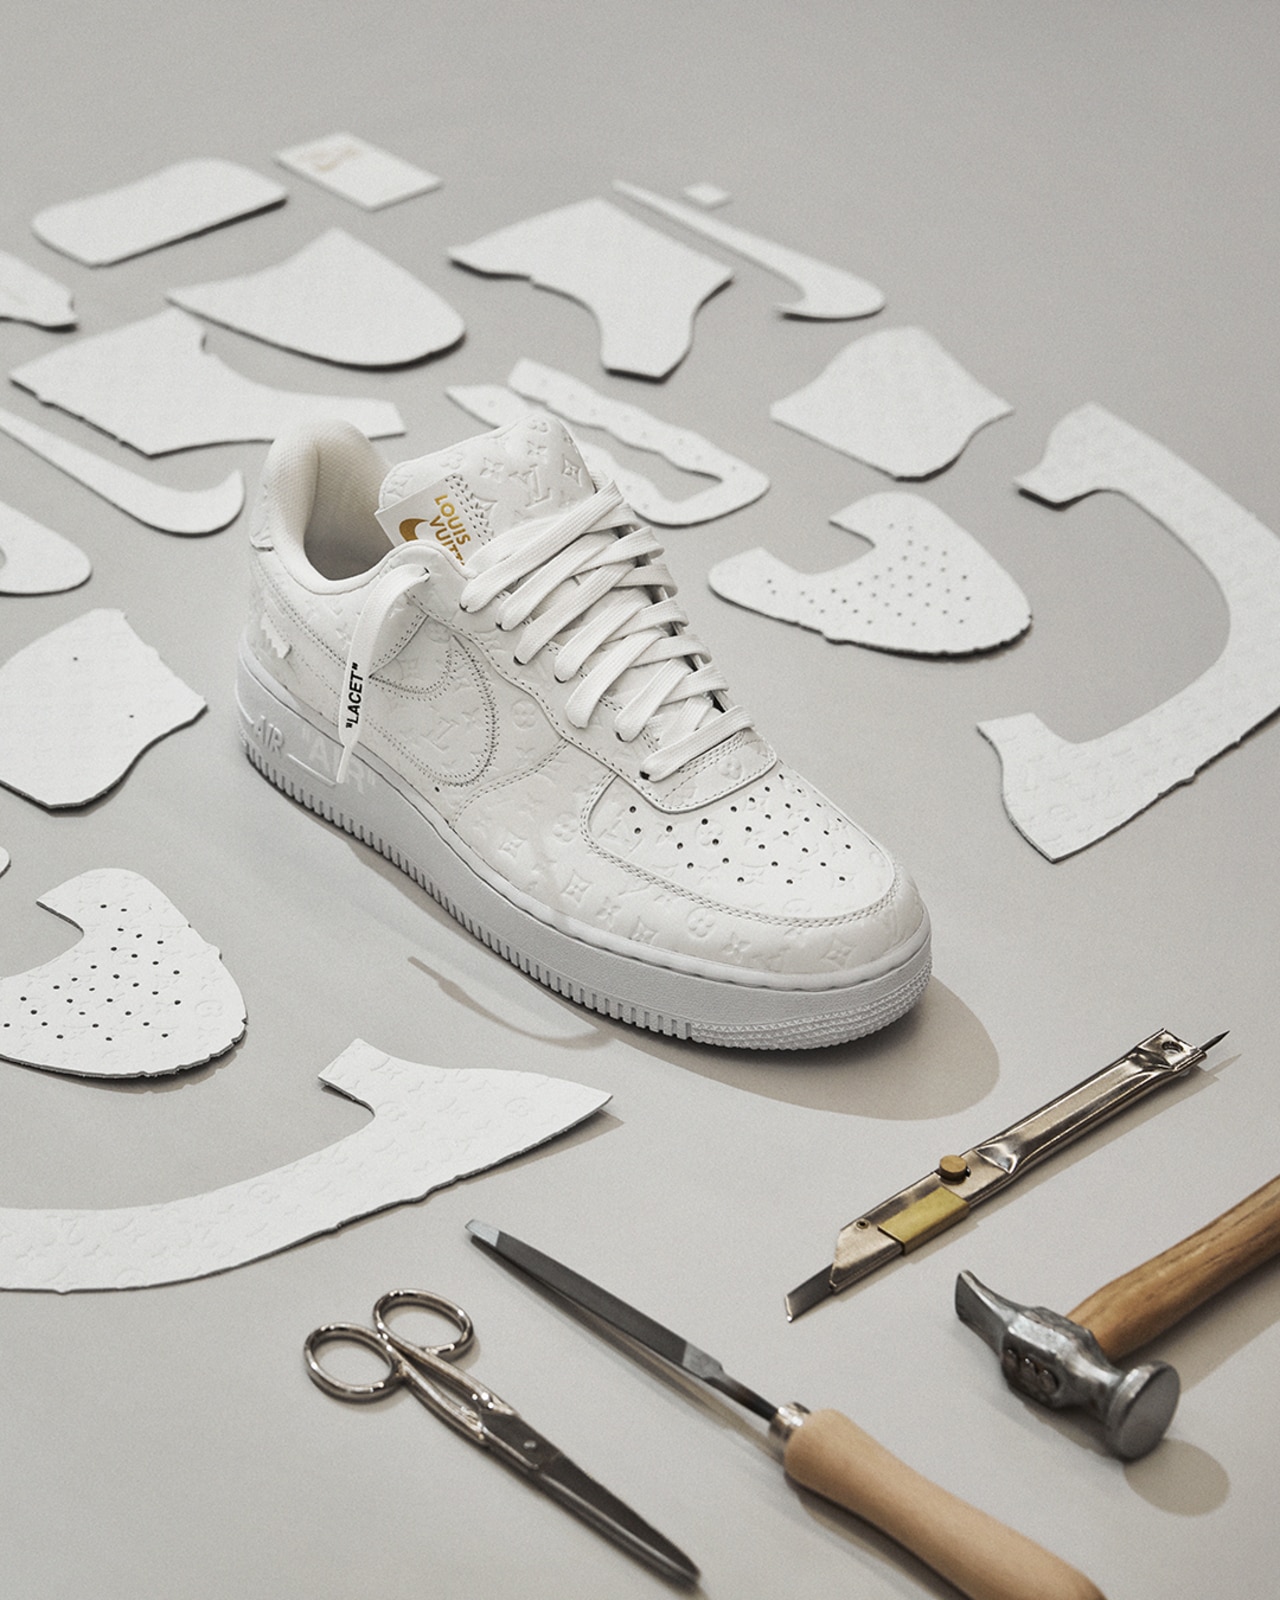 Where to buy the Louis Vuitton x Nike Air Force 1 range by Virgil Abloh